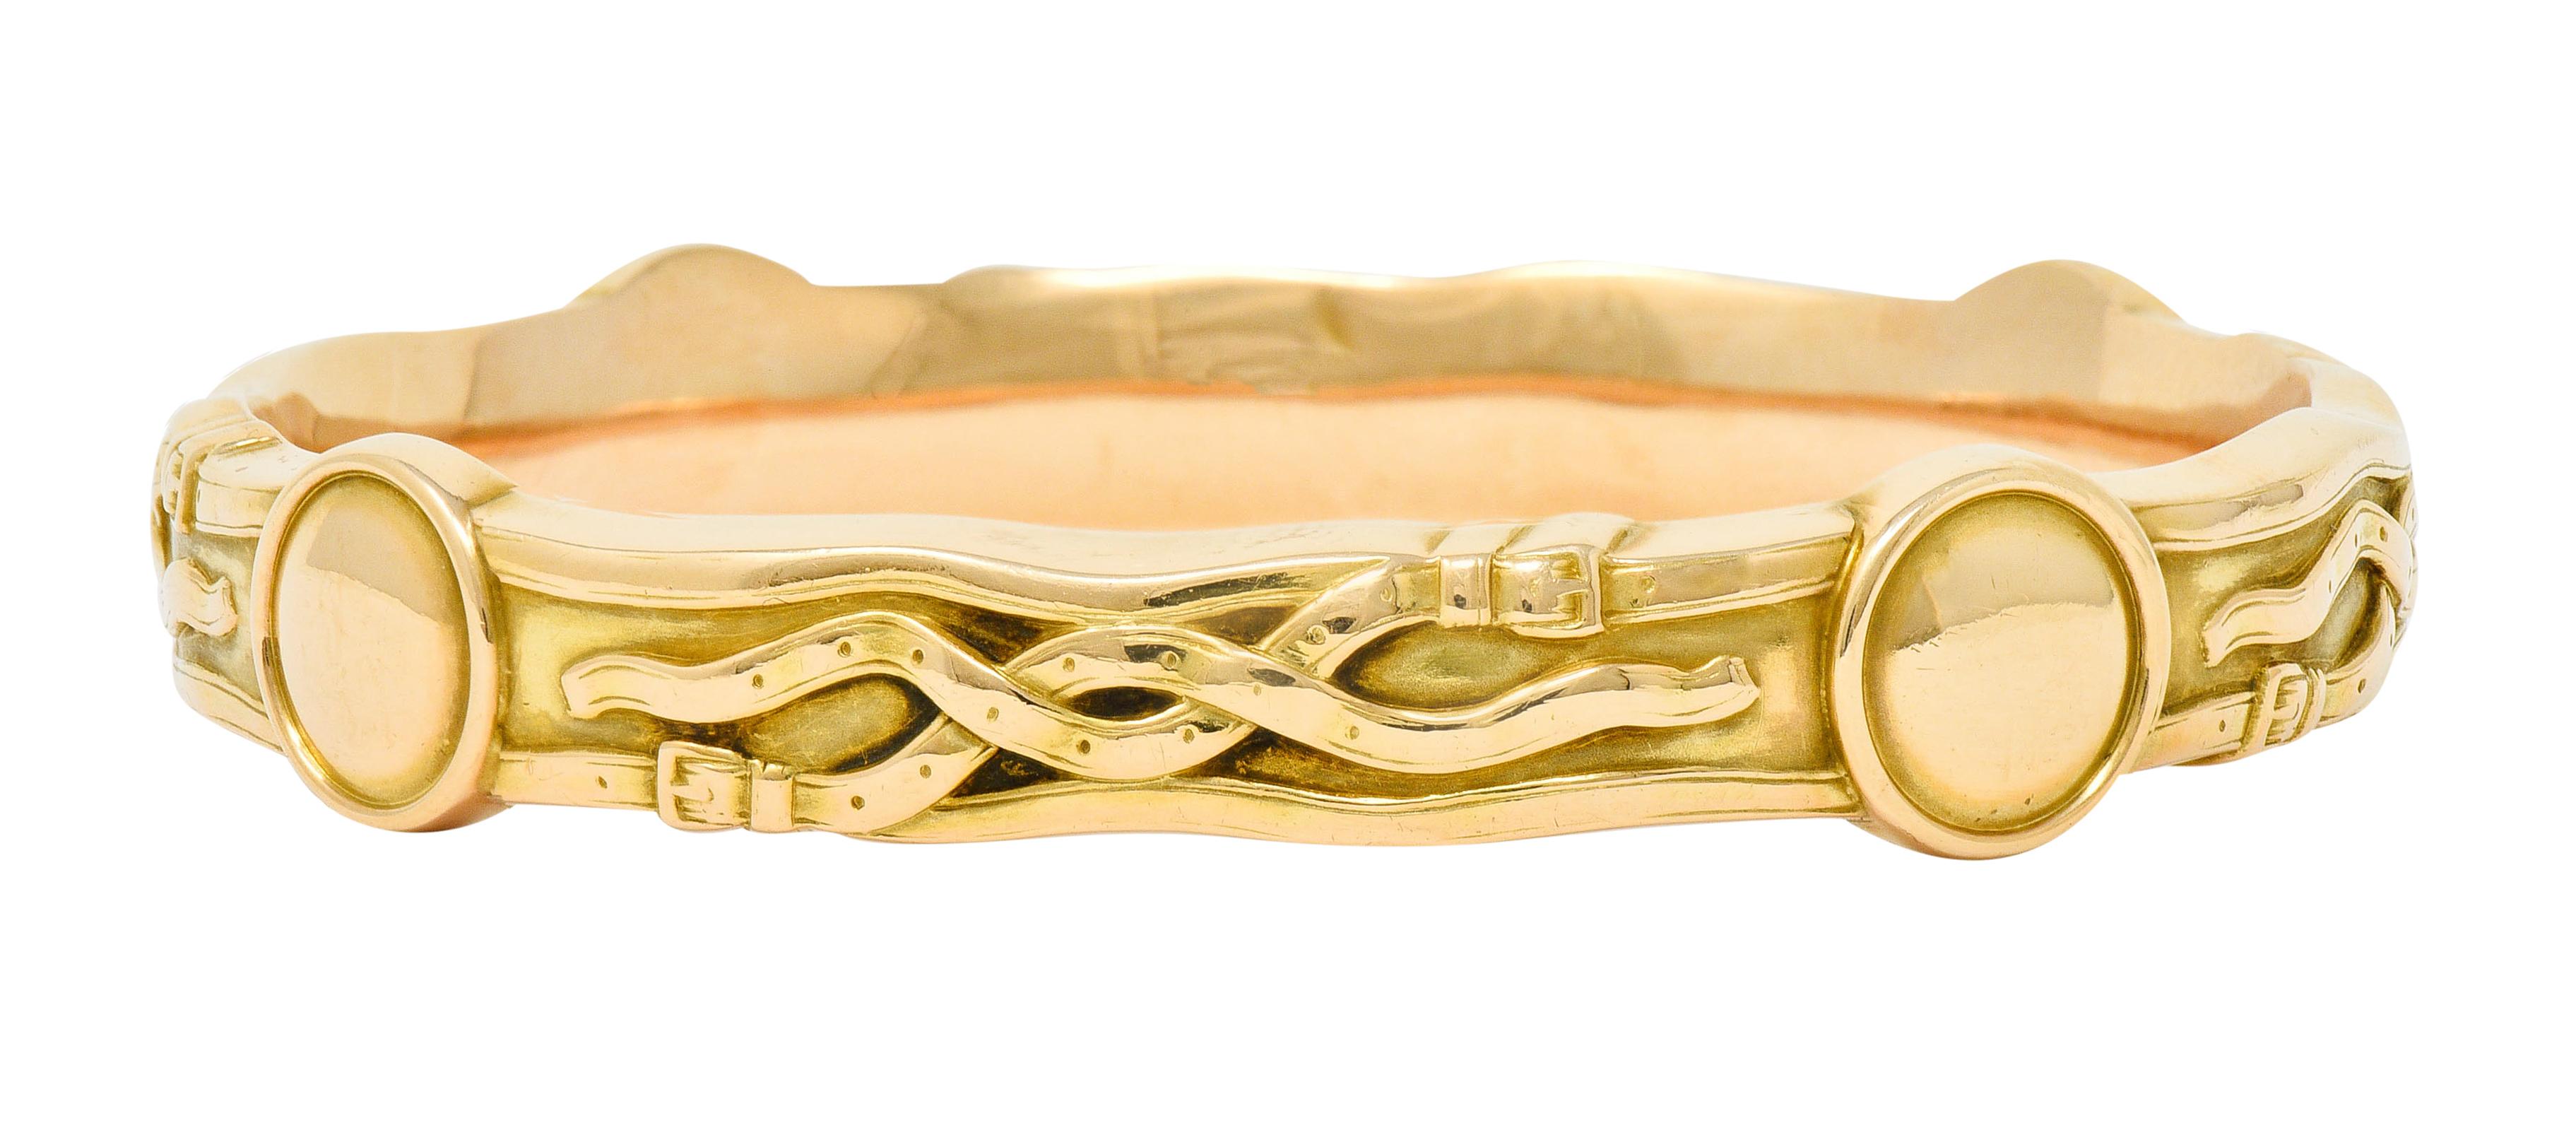 Designed as a wavy edged bangle bracelet featuring four polished circle stations

Decorated throughout by raised and stylized belt-straps

With maker's mark for Riker Brothers and stamped 14k for 14 karat gold

Circa 1900

Width at widest: 1/2